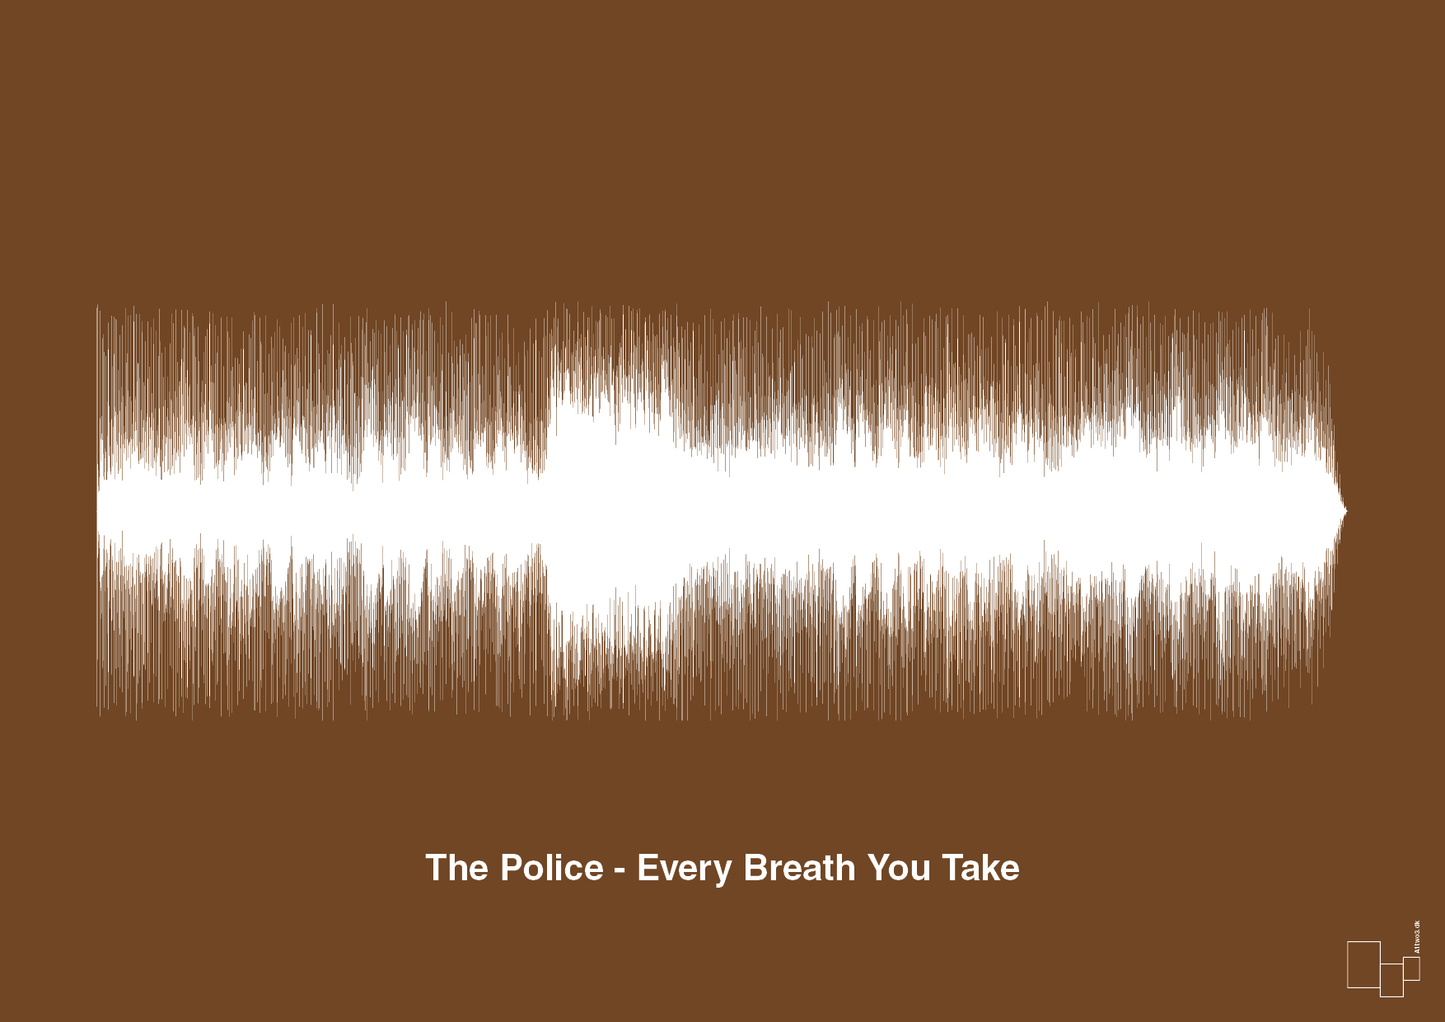 the police - every breath you take - Plakat med Musik i Dark Brown